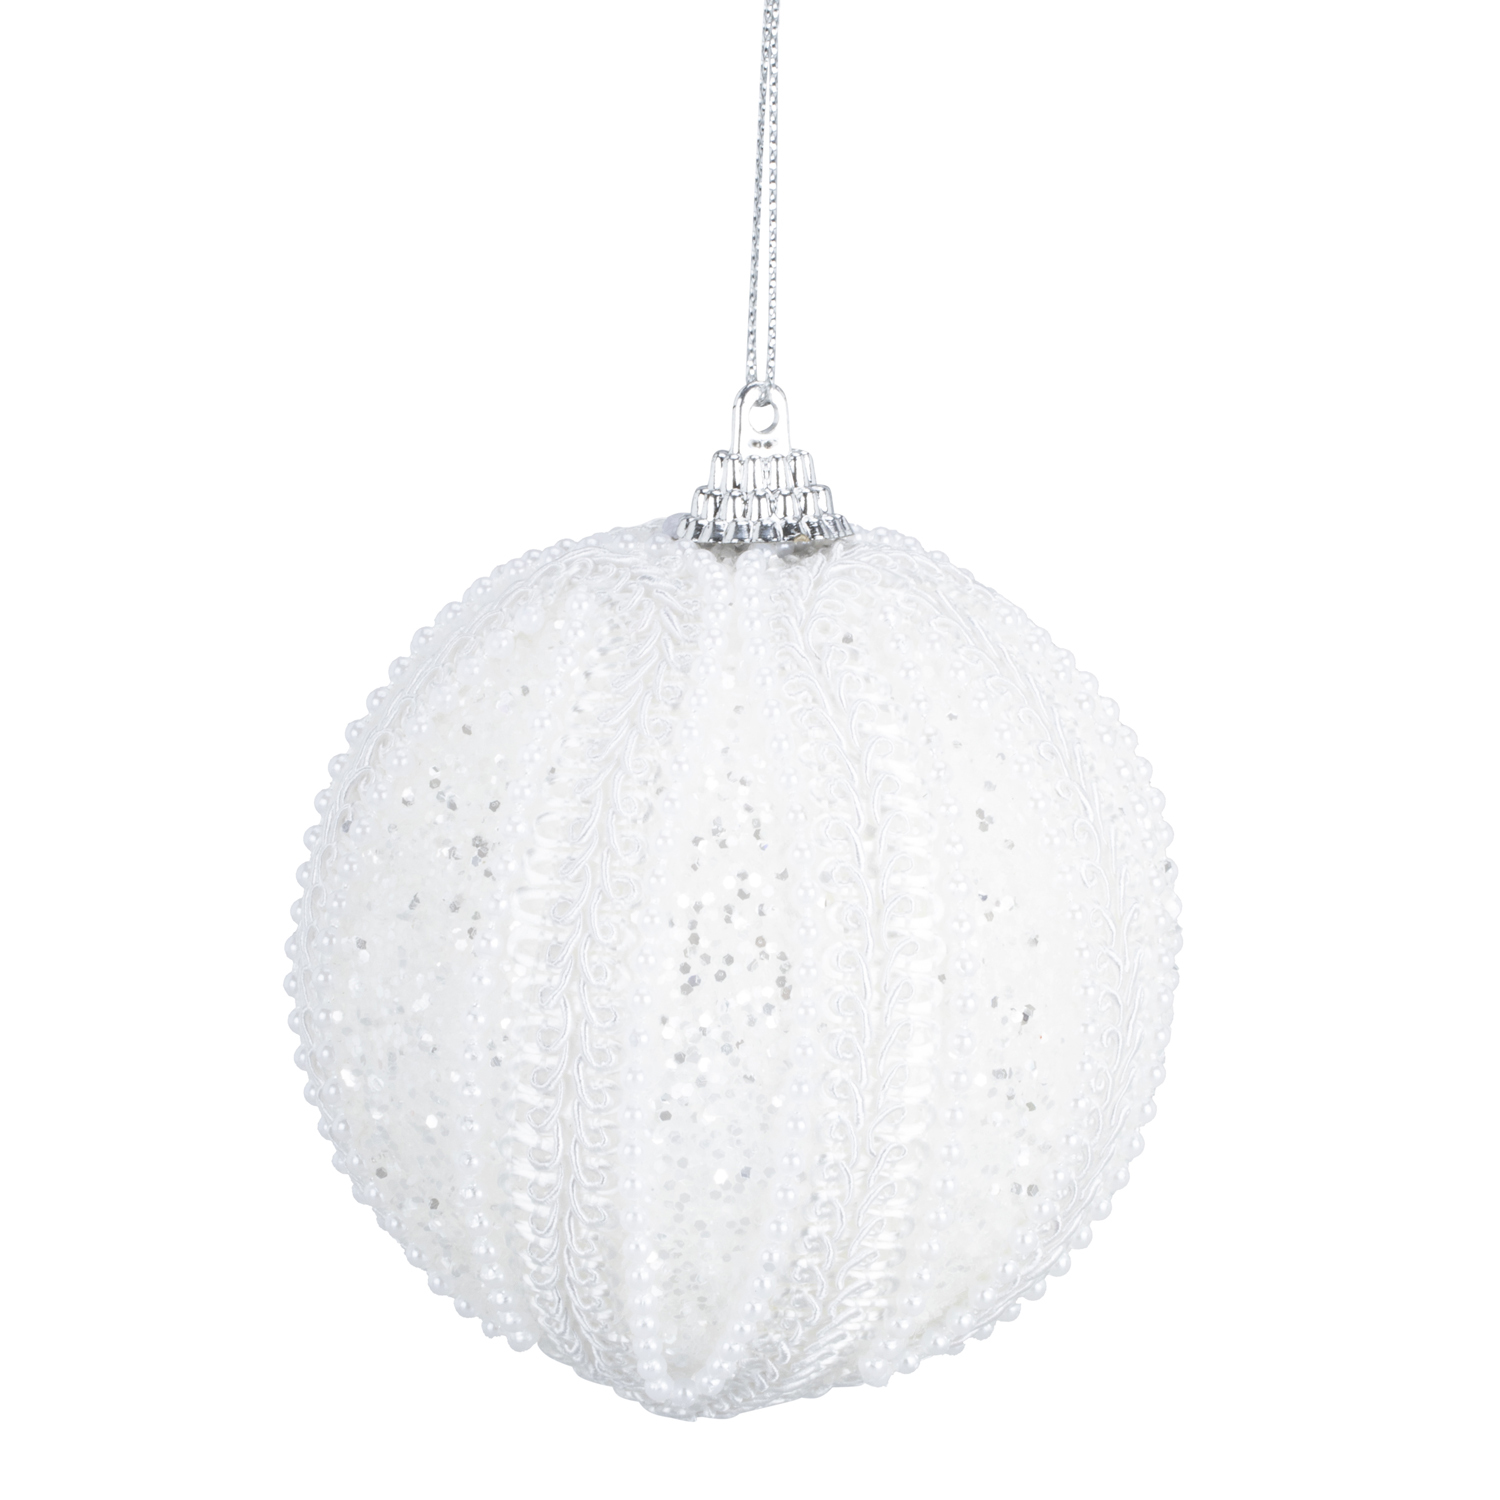 Frosted Fairytale White Glitter Bead Christmas Bauble Image